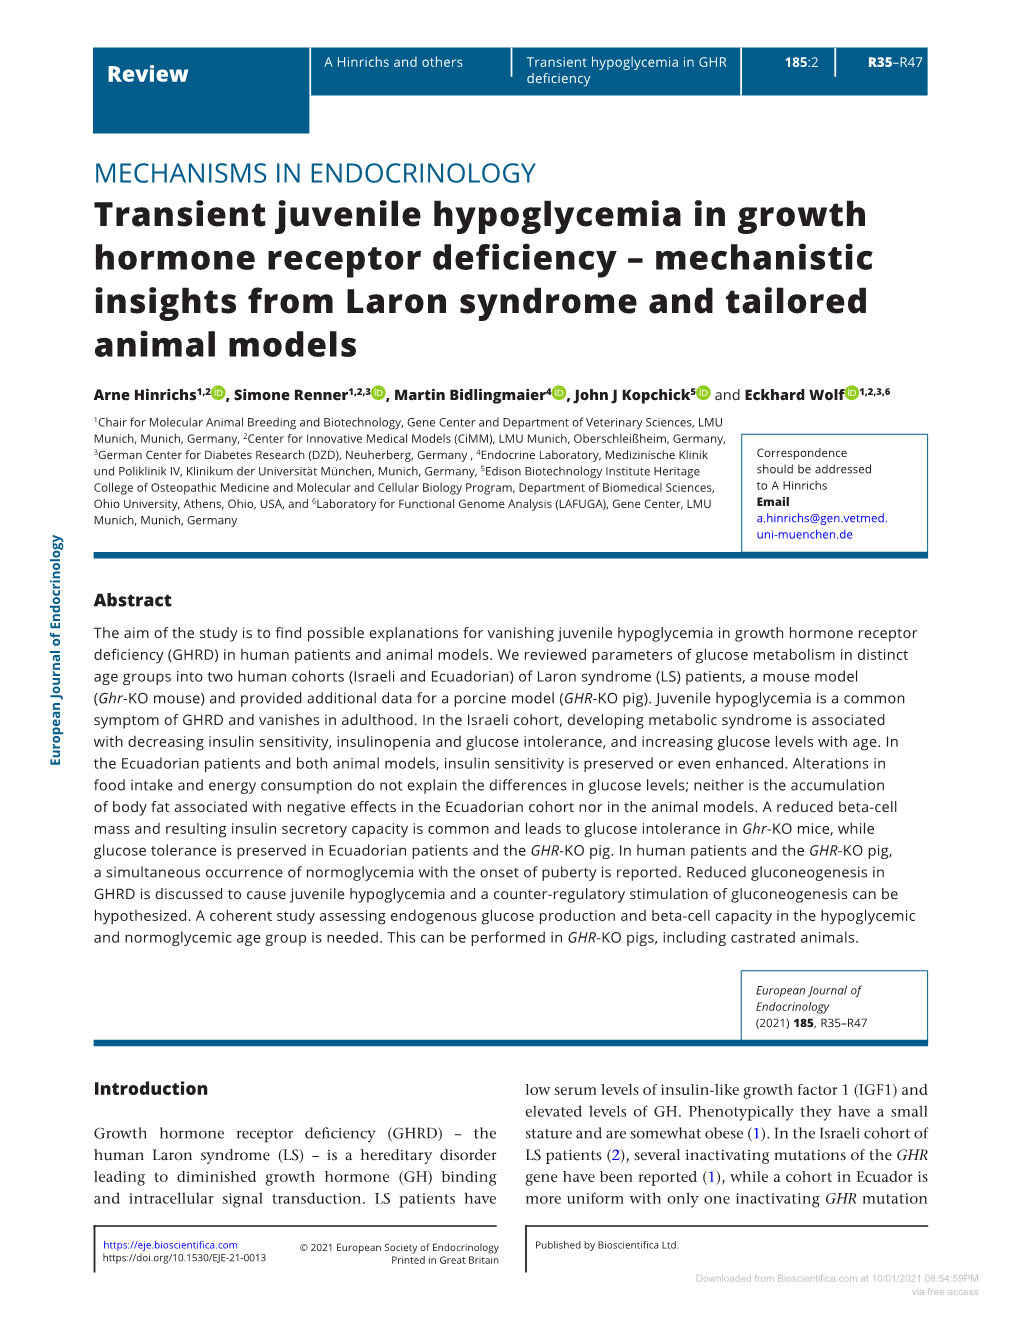 Transient Juvenile Hypoglycemia in Growth Hormone Receptor Deficiency – Mechanistic Insights from Laron Syndrome and Tailored Animal Models